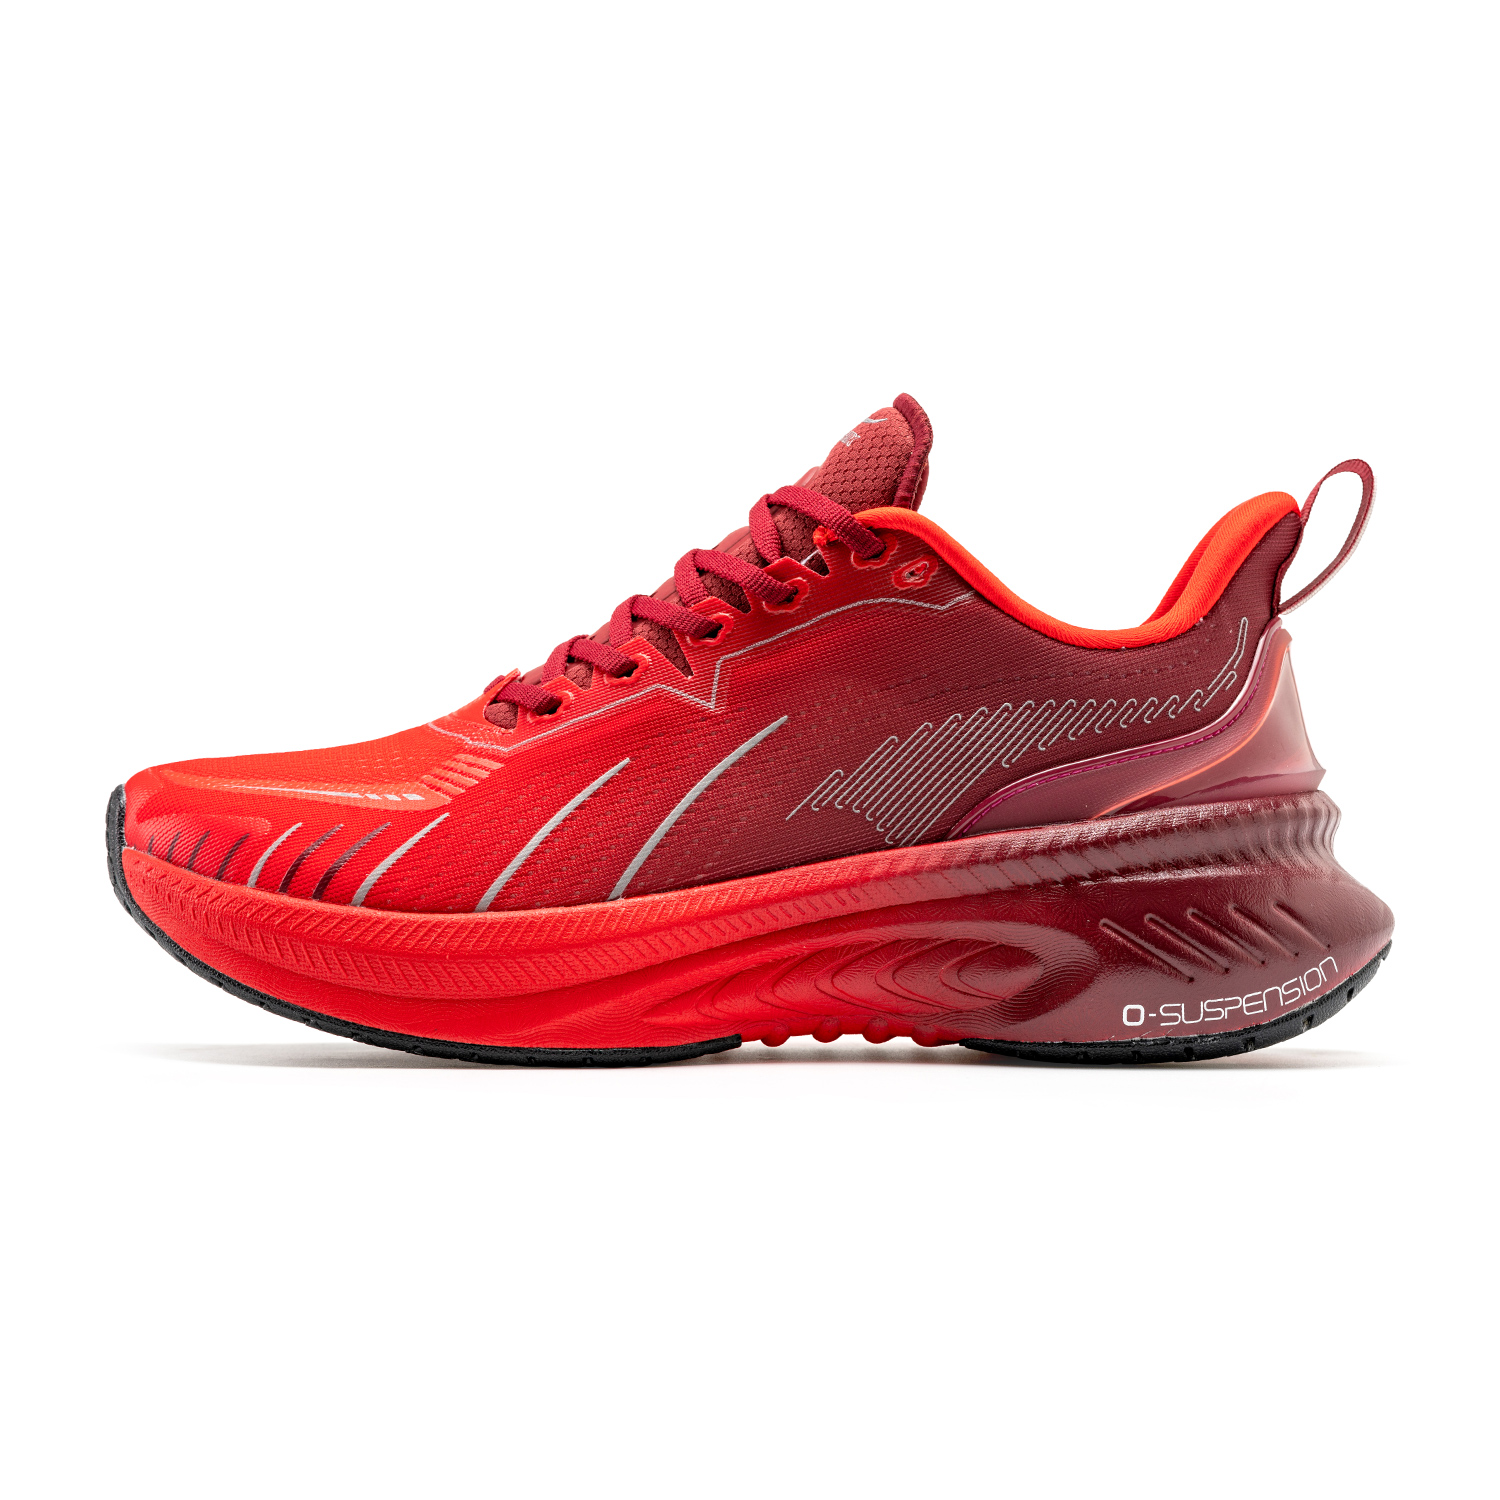 Red Running Shoes ONEMIX Original Sneakers for Men Women - Click Image to Close